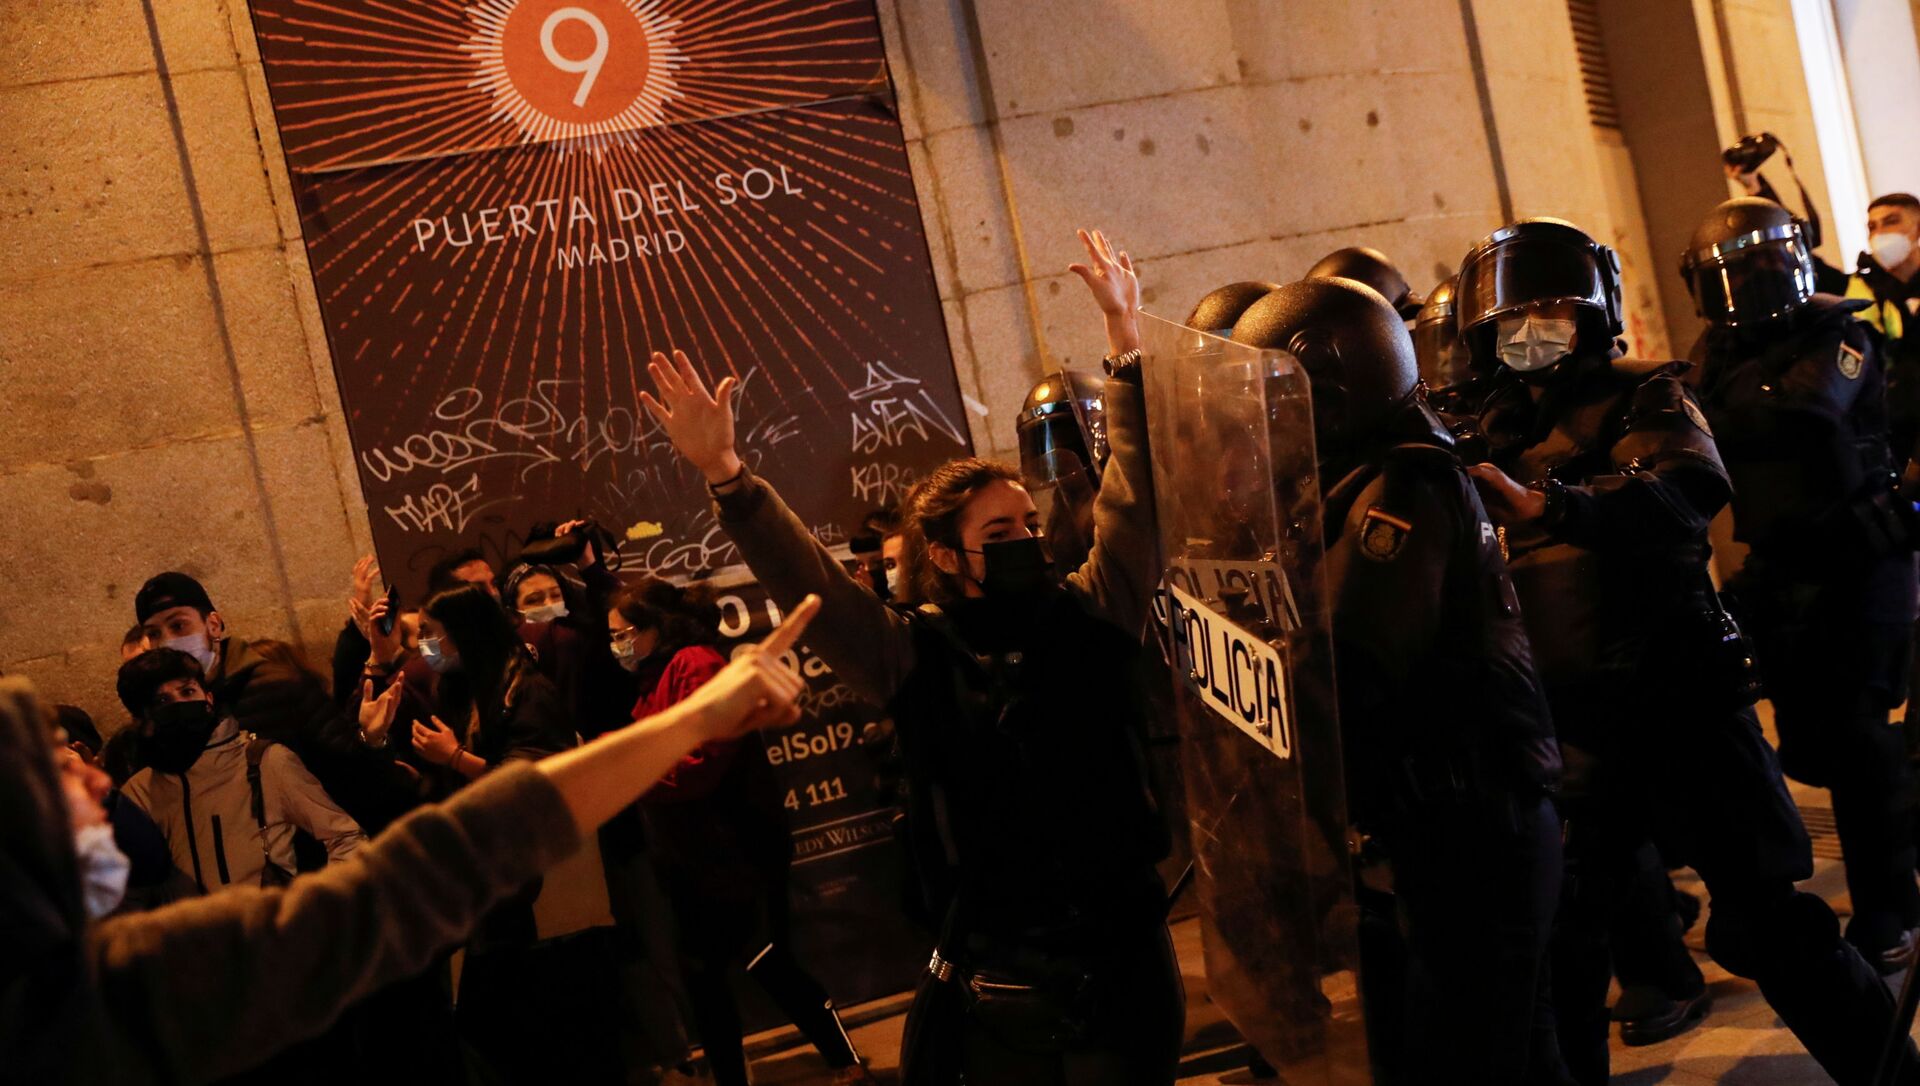 A person raises the hands in front of police officers as supporters of Catalan rapper Pablo Hasel protest against his arrest in Madrid, Spain, February 17, 2021. - Sputnik International, 1920, 17.02.2021